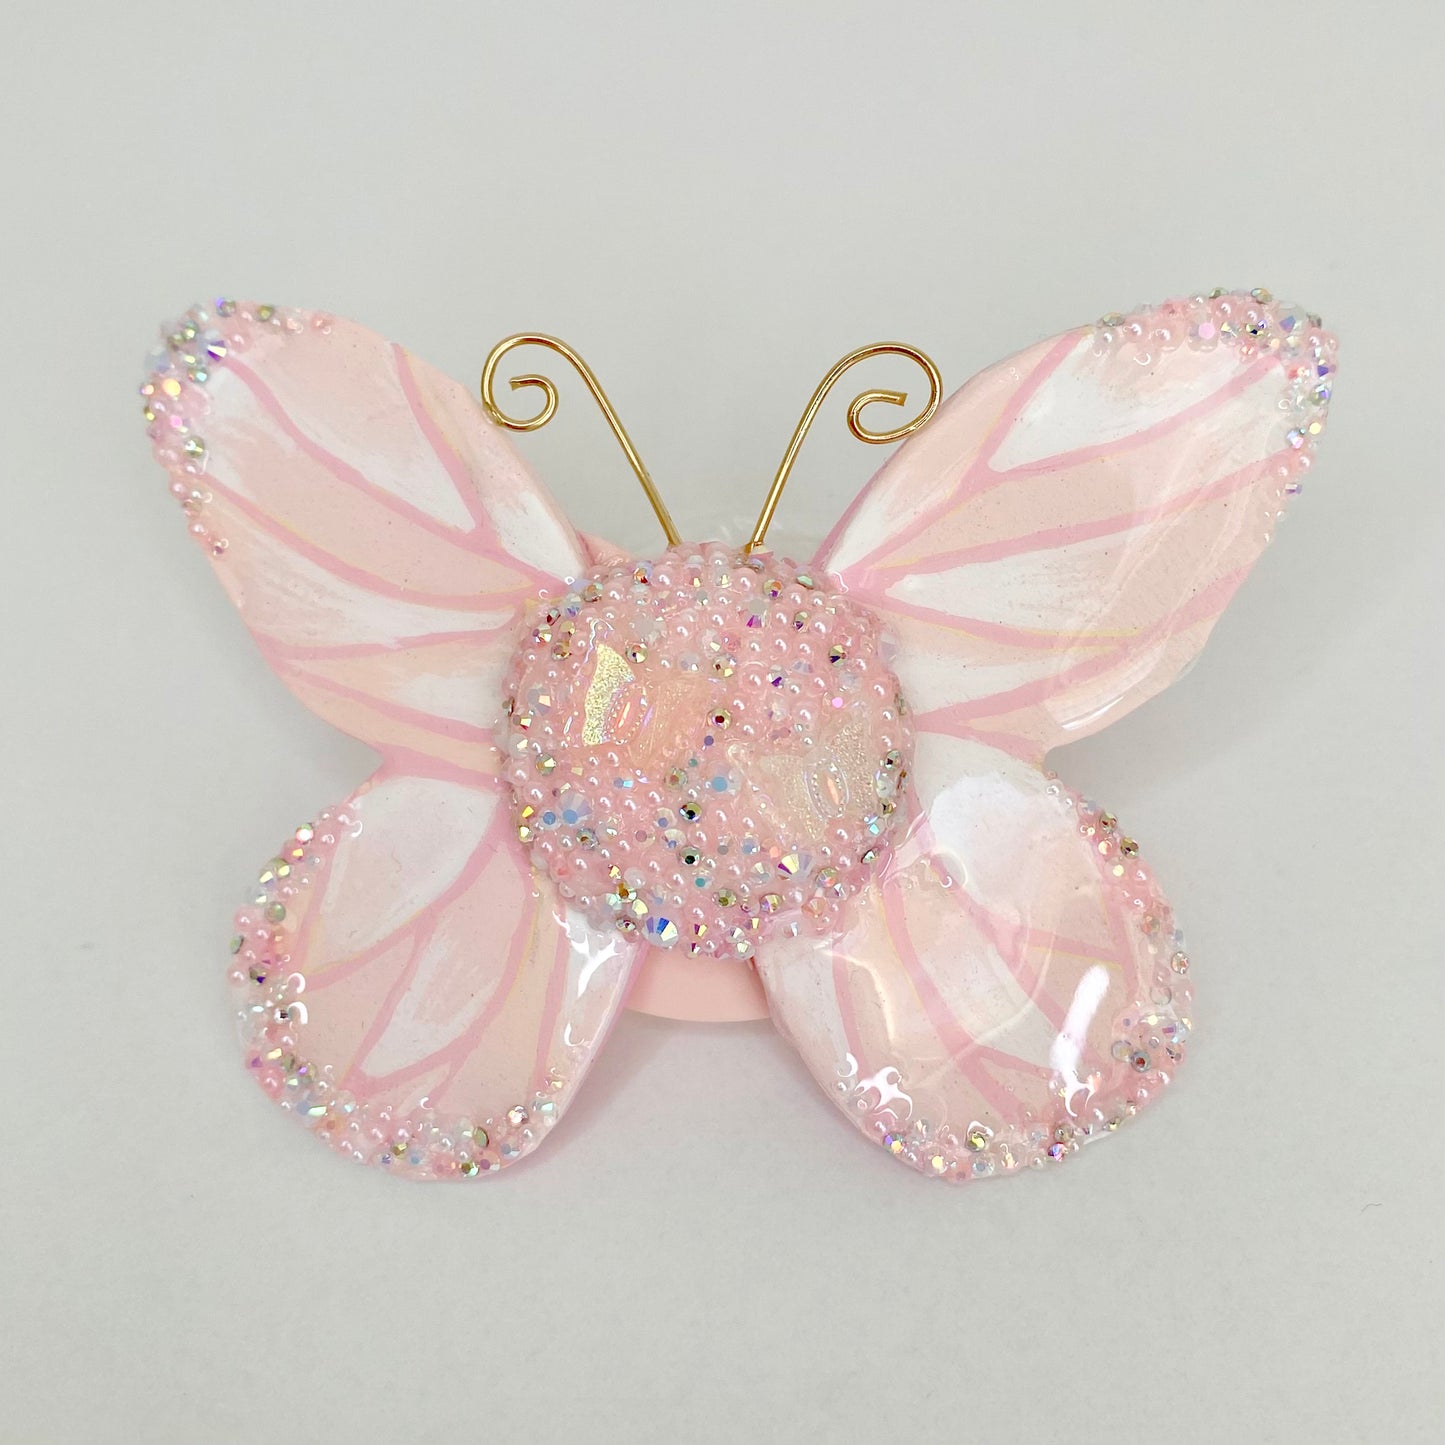 luxe whimsical wings - Shaped adult pacifiers